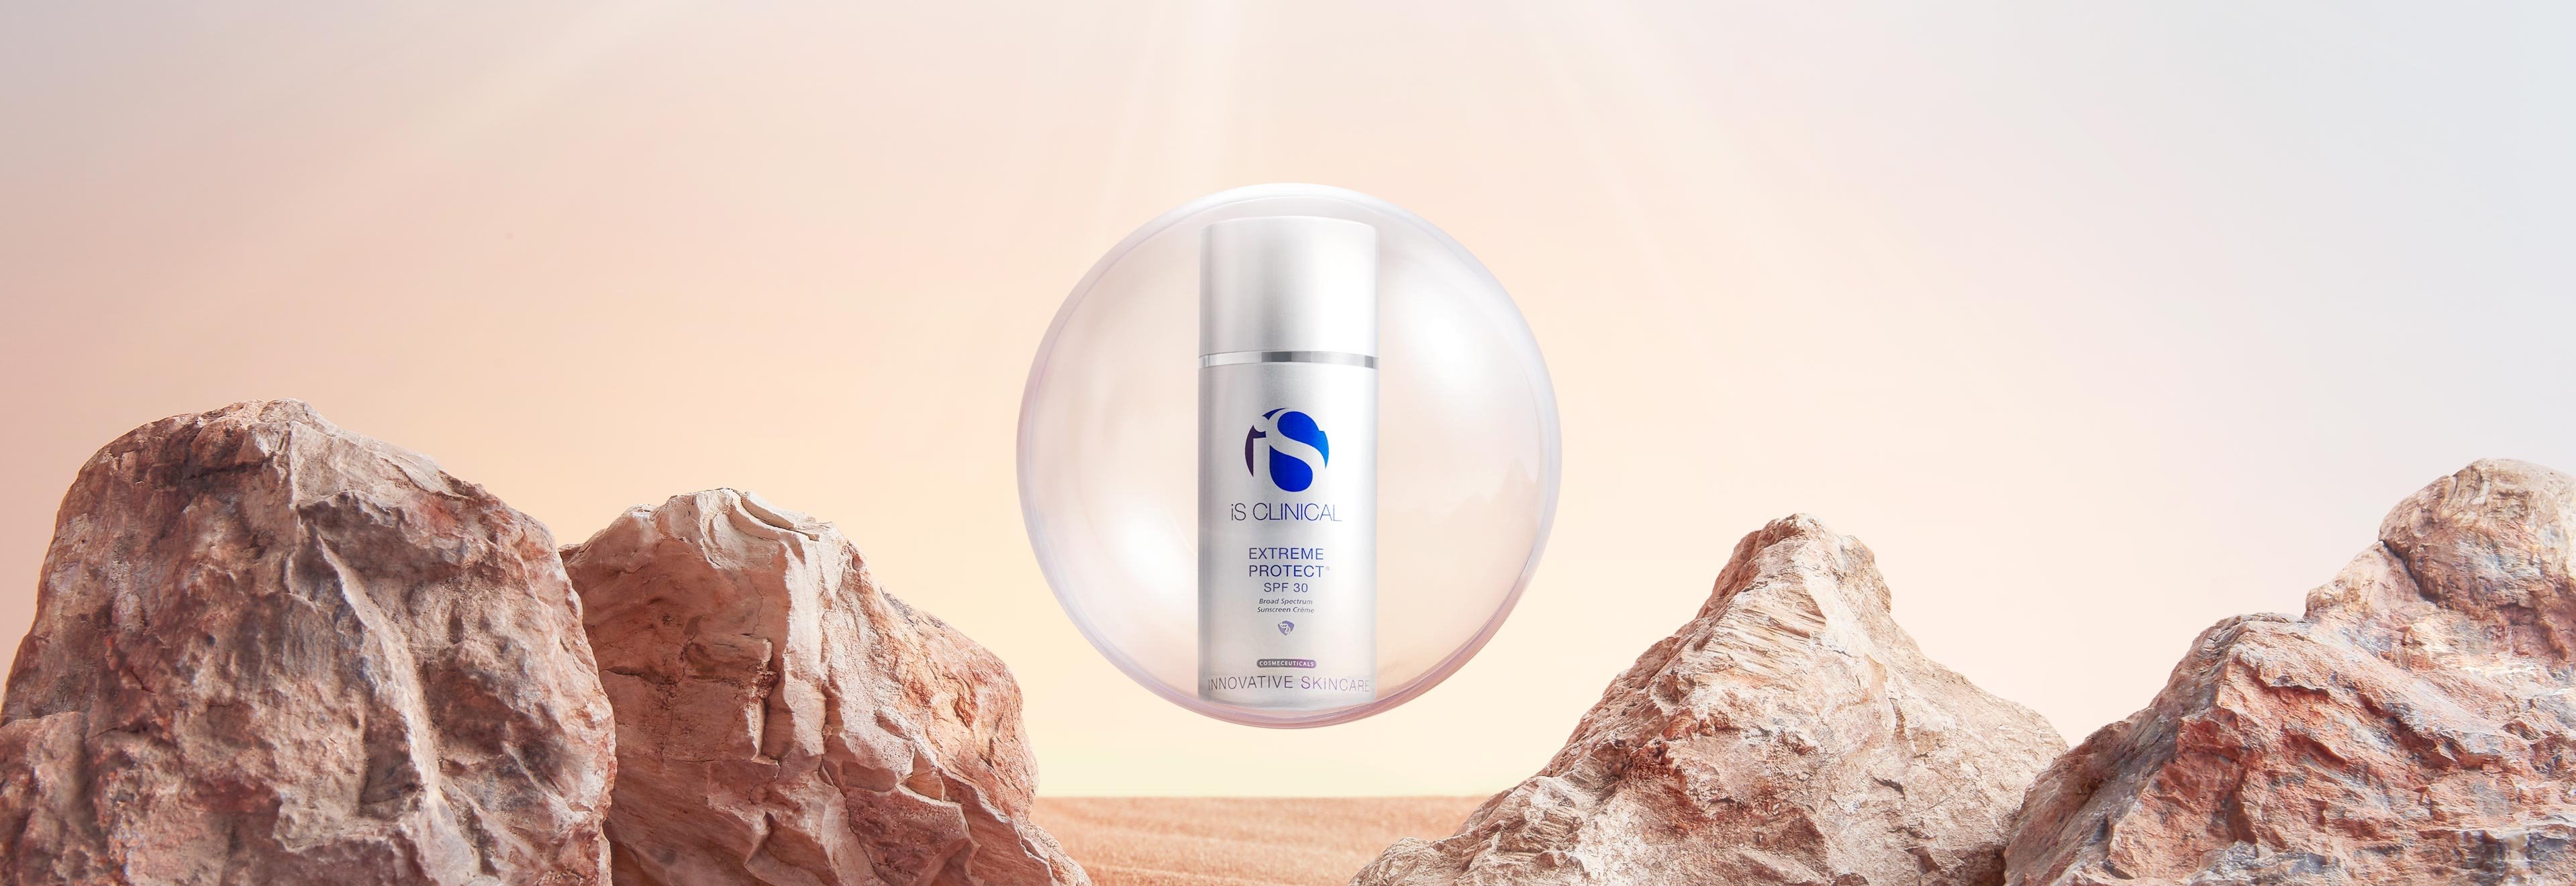 Extreme Protect SPF 30 iS CLINICAL